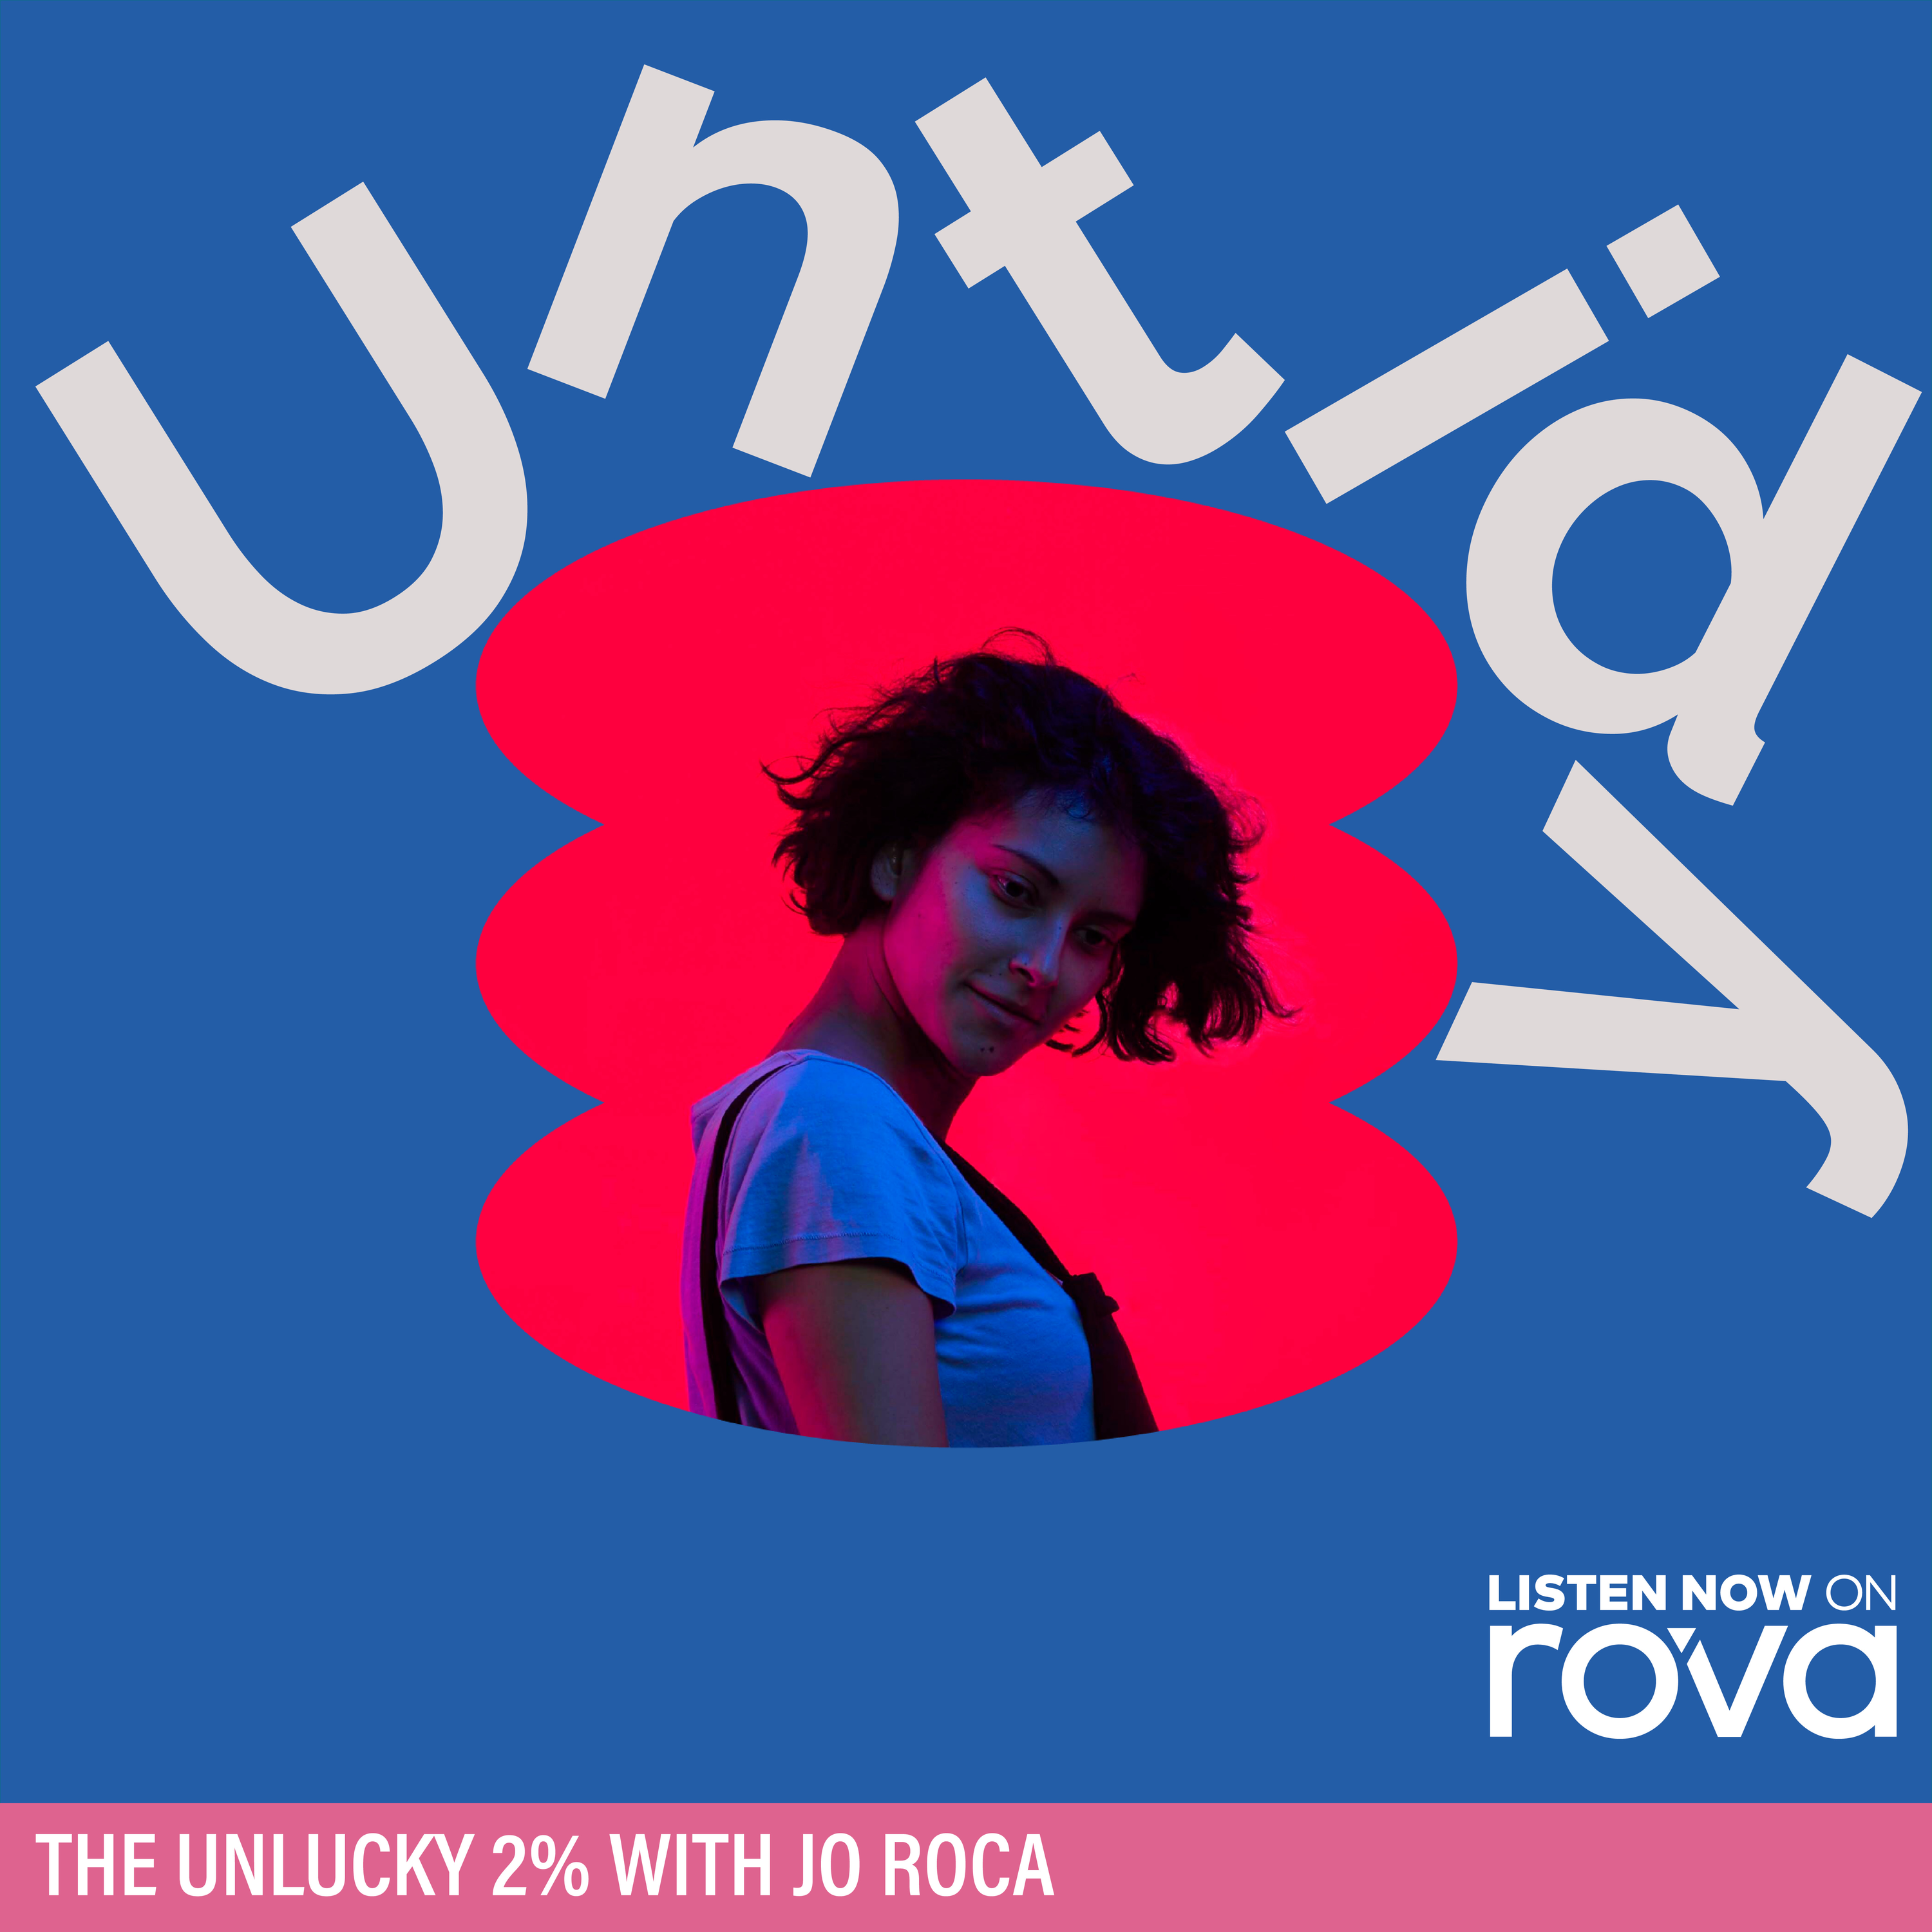 The unlucky 2% with Jo Roca